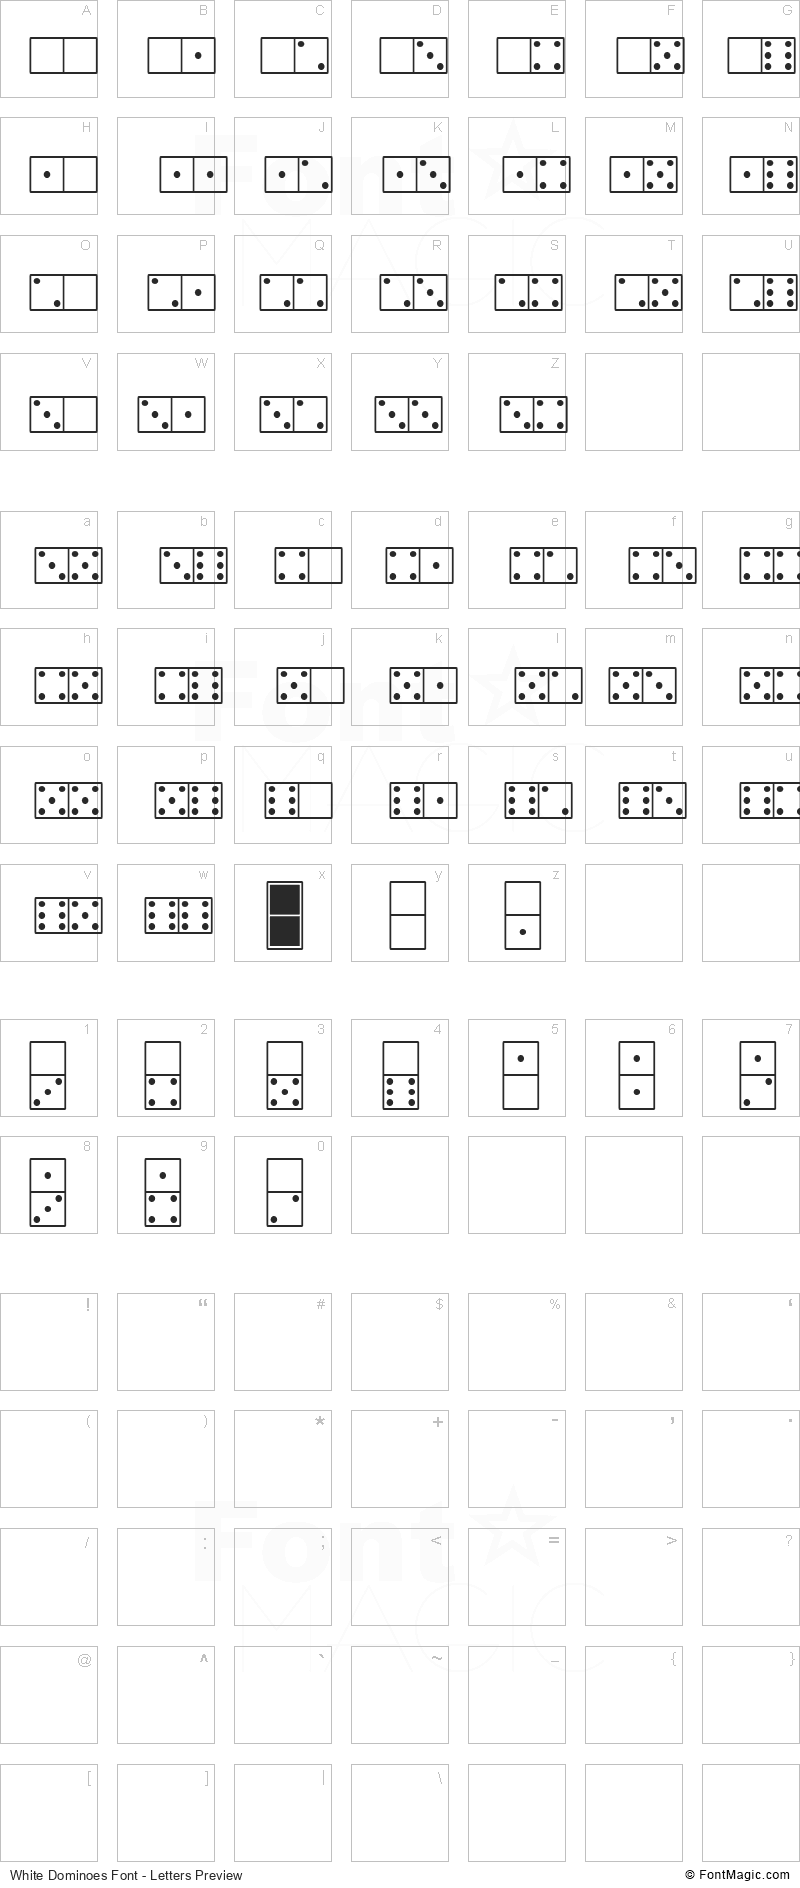 White Dominoes Font - All Latters Preview Chart